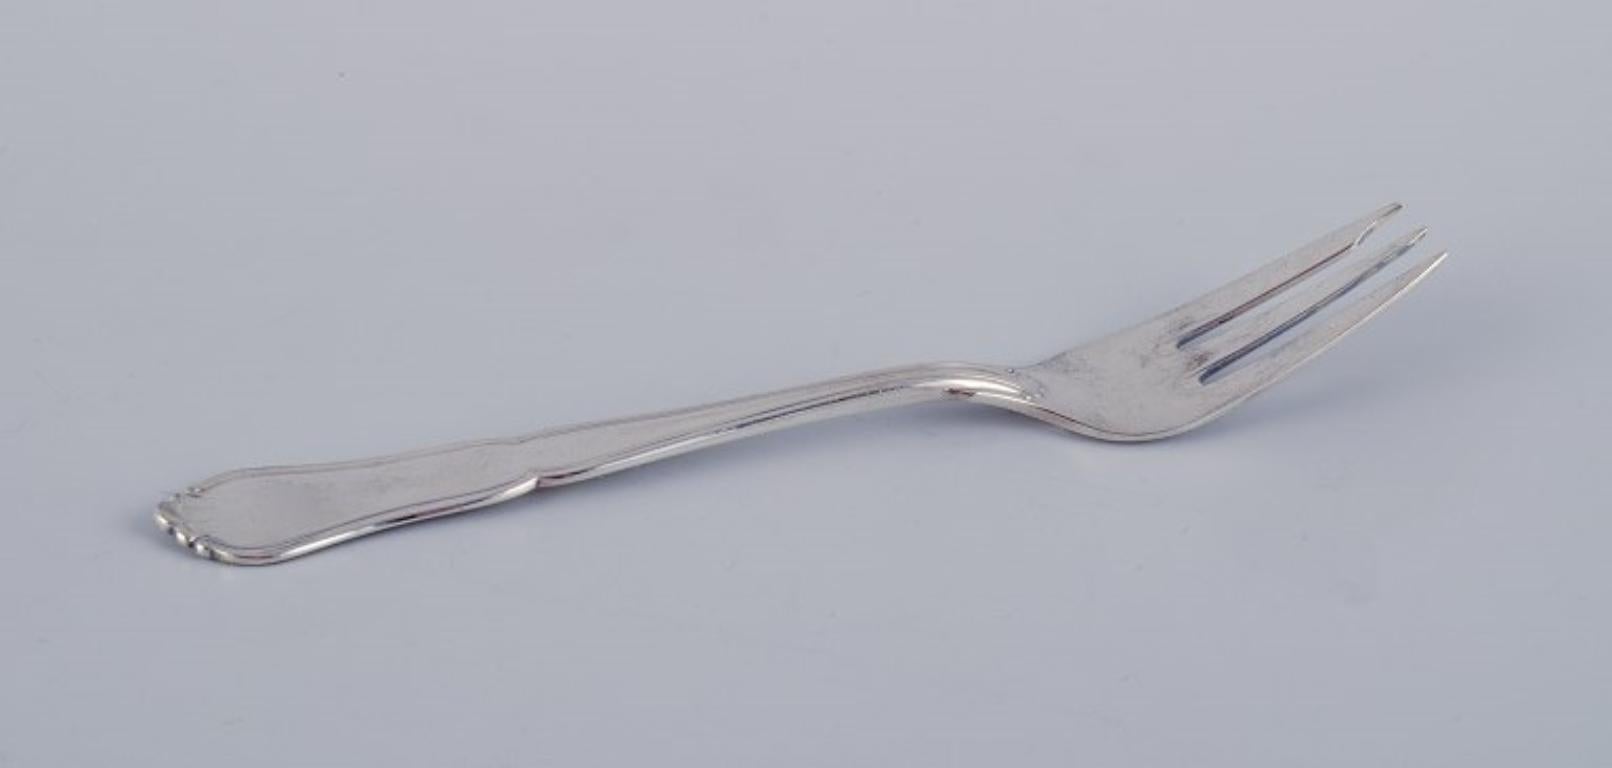 Horsens Silver. A set of five cake forks in 830 silver.
From the 1930s.
Hallmarked.
In excellent condition.
Dimensions: Length 13.5 cm.